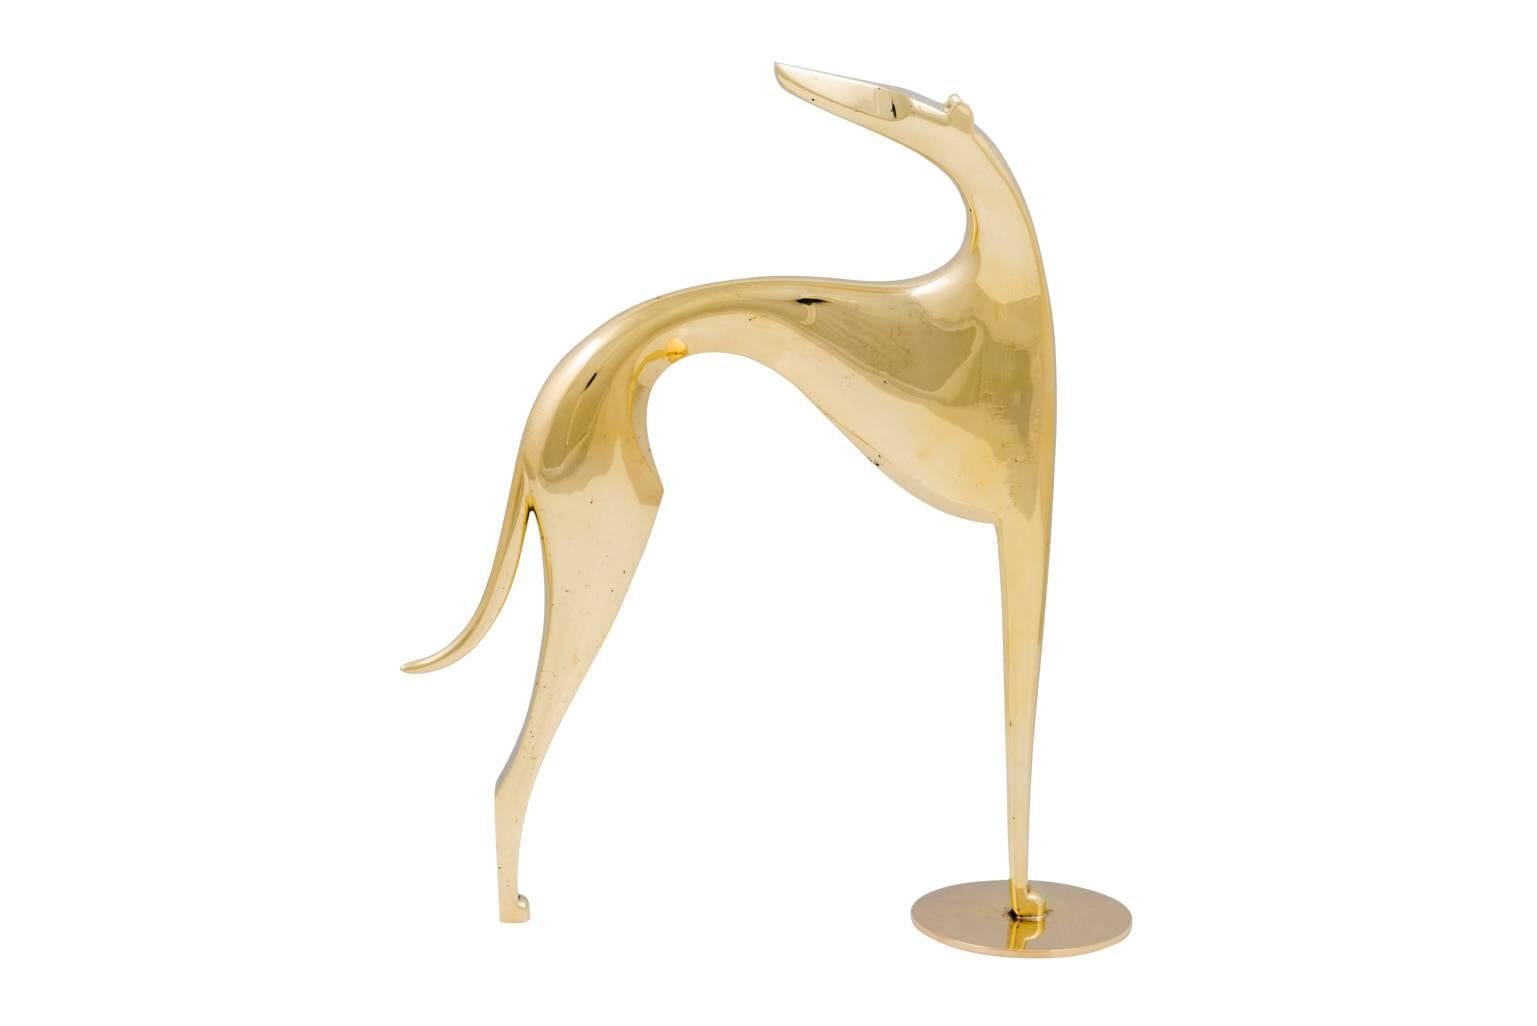 Depictures of animals were a popular motive throughout the activity of the Werkstätte Hagenauer. This greyhound was designed, circa 1950 and bribes the viewer with a sublime, elegant and powerful portrayal. It is executed in a high quality and the